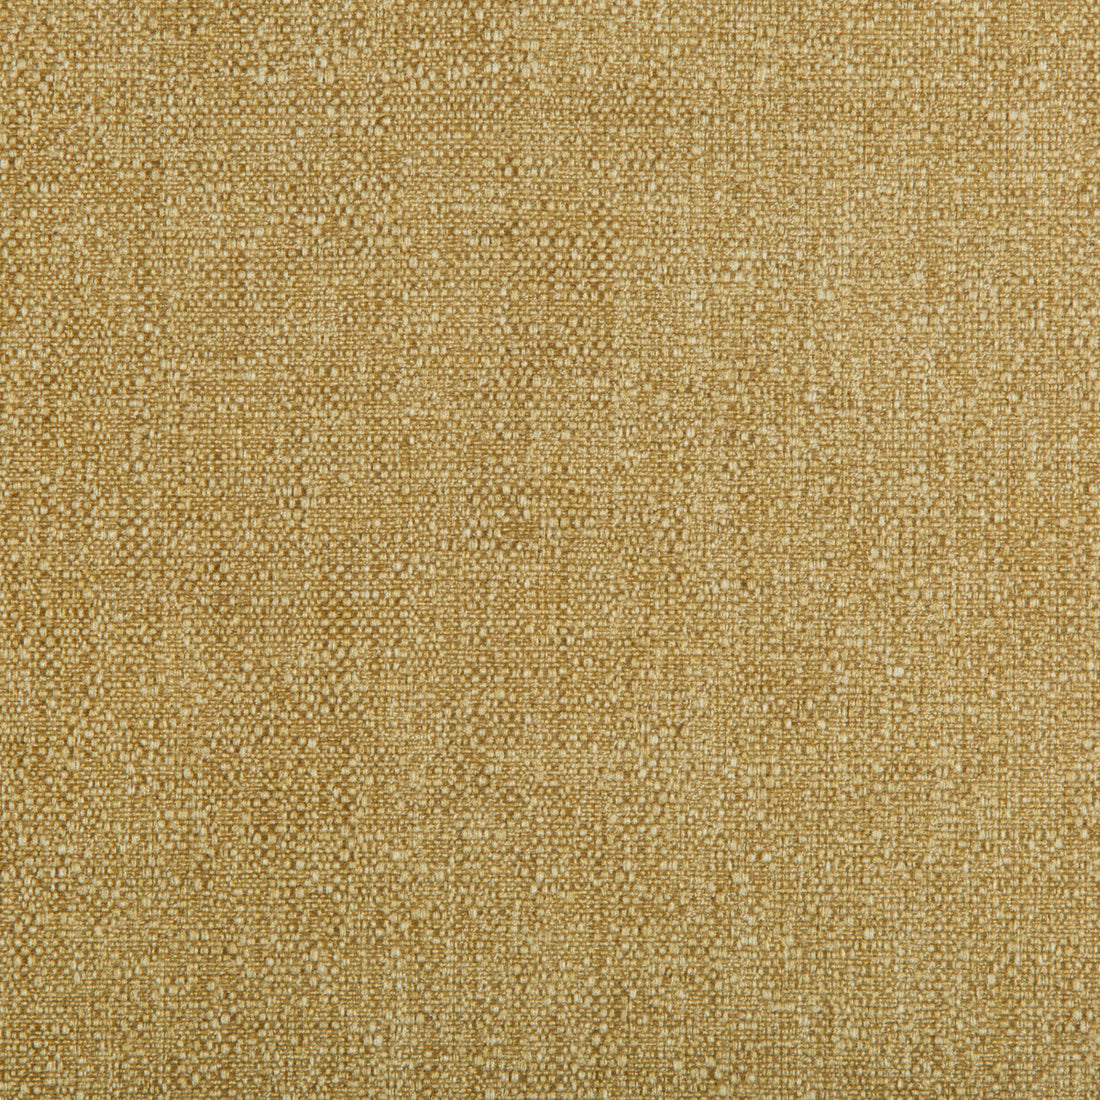 Kravet Contract fabric in 35405-4 color - pattern 35405.4.0 - by Kravet Contract in the Crypton Incase collection